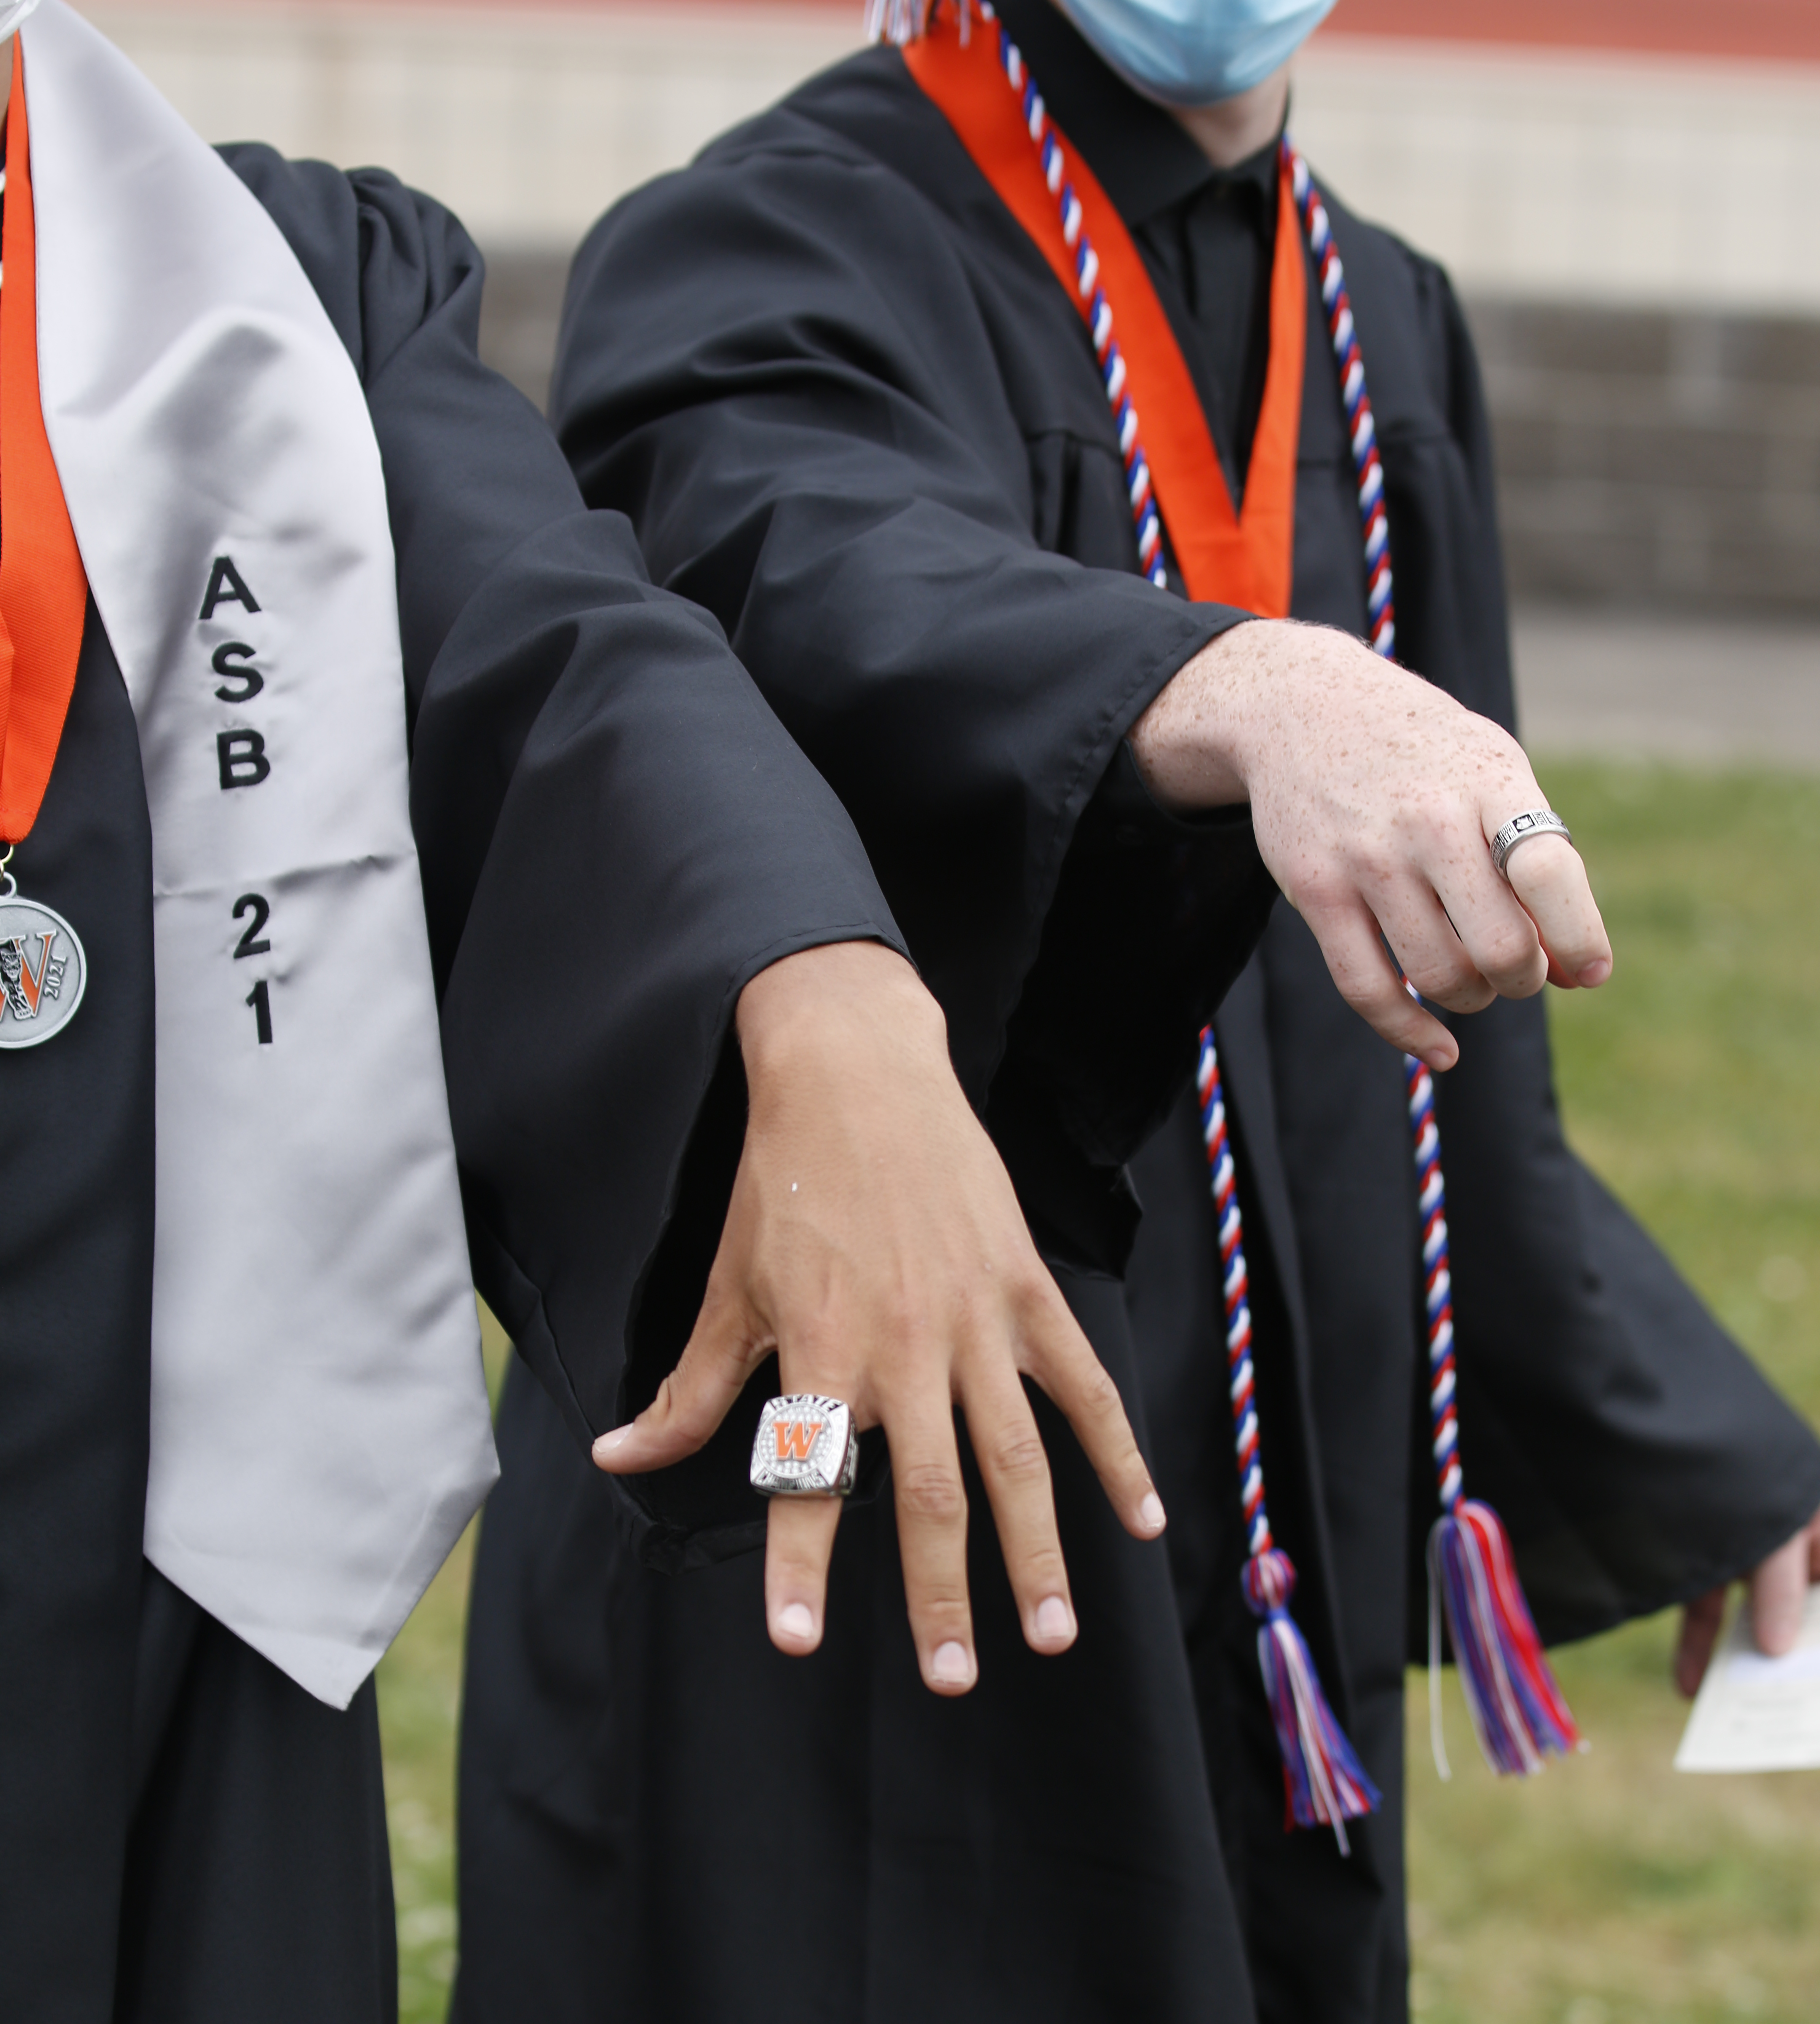 Washougal High School graduates show off their class rings during the school's graduation ceremony on Saturday, June 12, at Fishback Stadium in Washougal. (Kathy Sturdyvin-Scobba/For the Post-Record)